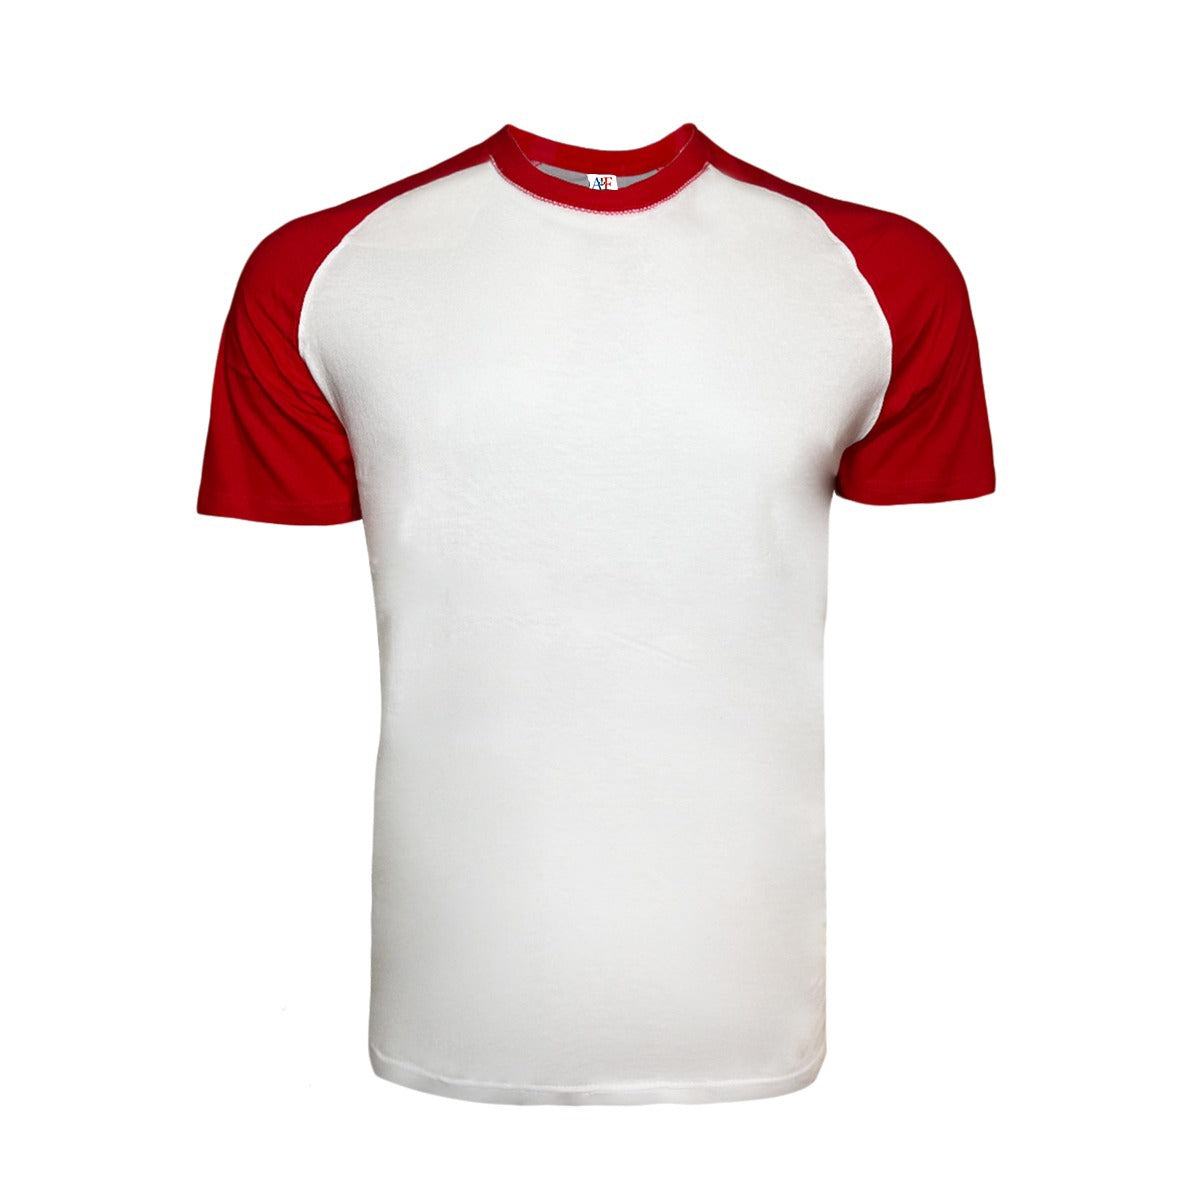 1101 - Youth Baseball Tee - Red/White Color - AF APPARELS(USA)